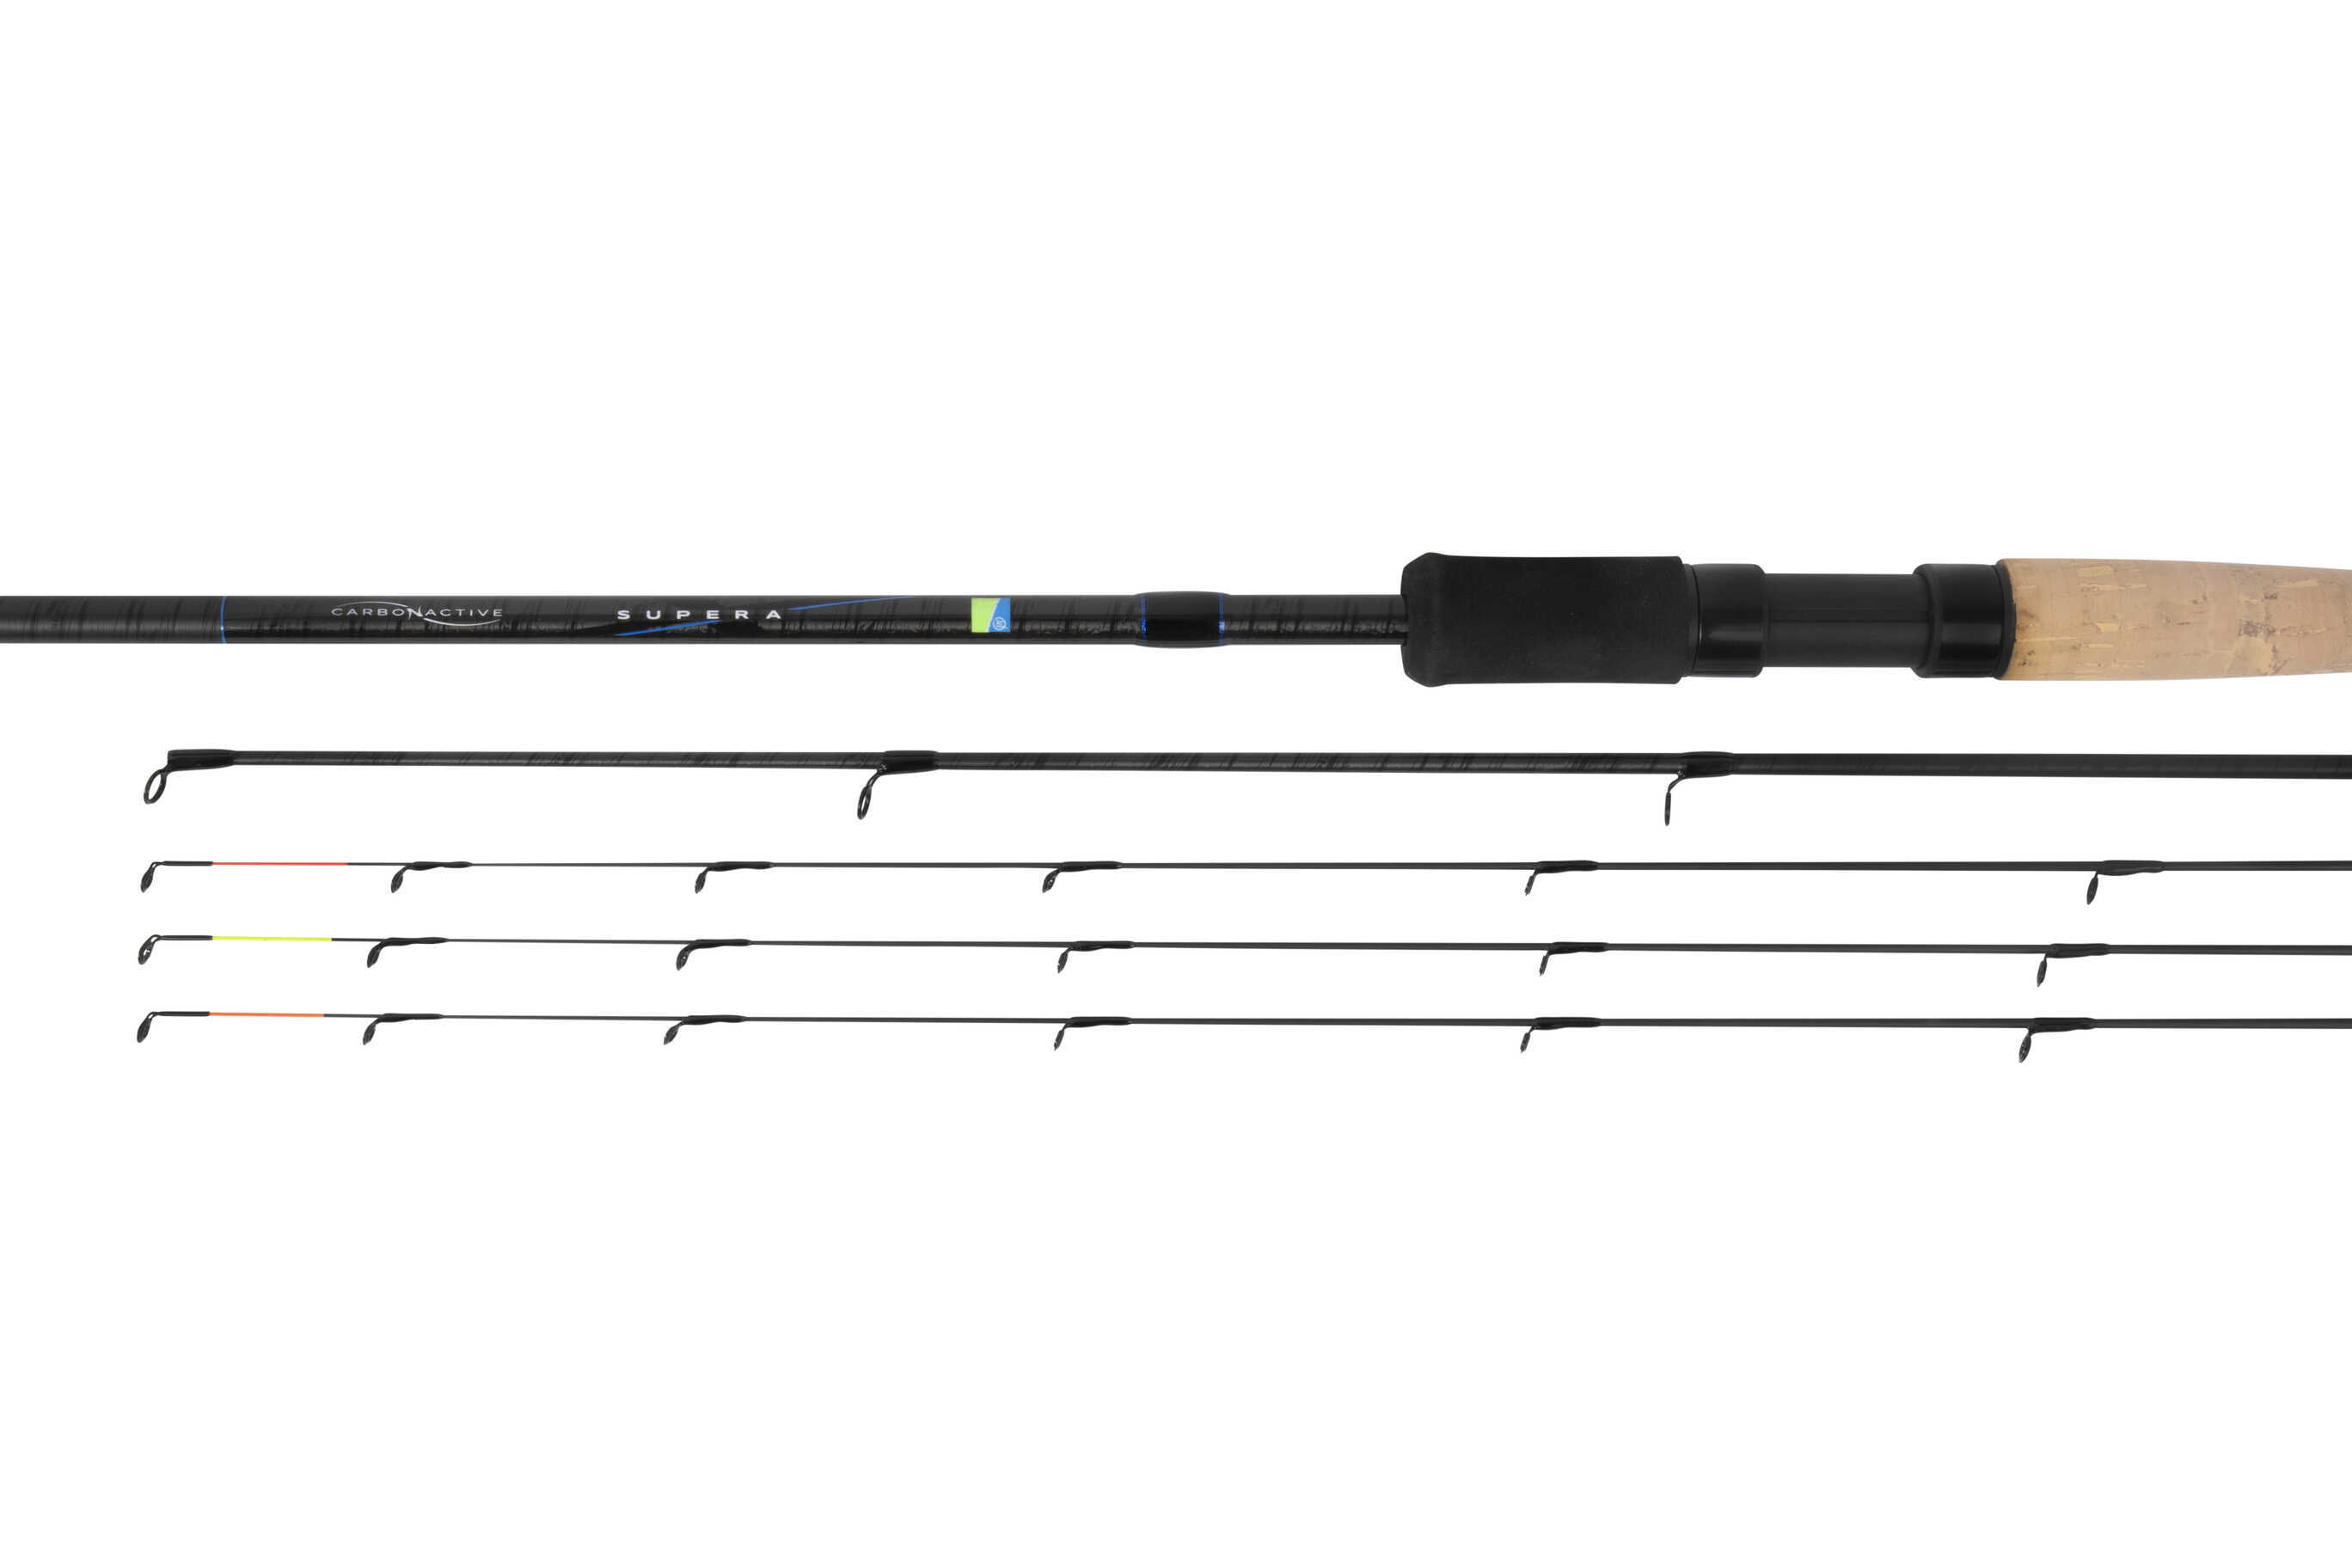 Supera X Feeder Rods, UK Match Fishing Tackle For True Anglers